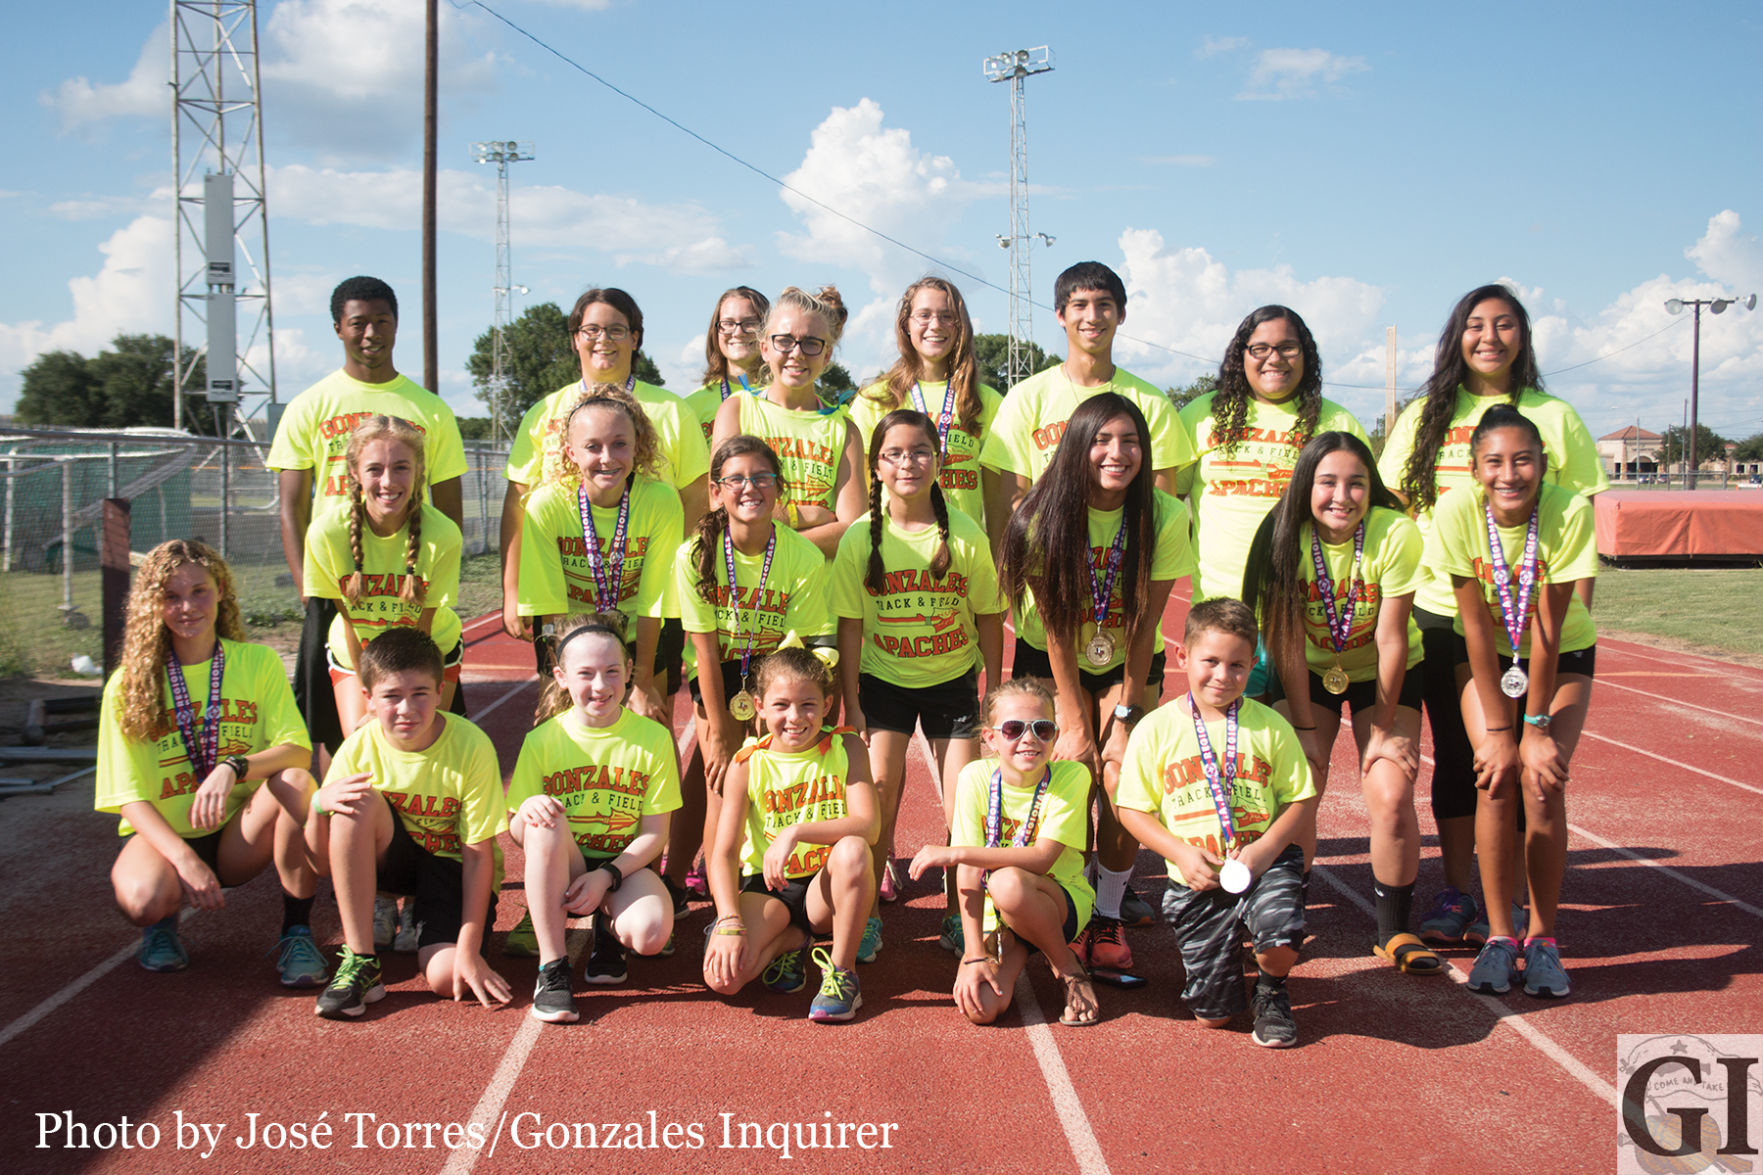 Pictured are the athletes that are headed to the state track meet at the TAAF Summer Games that will take place in McAllen from July 27-30. Not pictured are Hailey Doyle, Brody Doyle, Jet Doyle, Maggie Barnick, Juan Jordan and Antonio Hernandez.